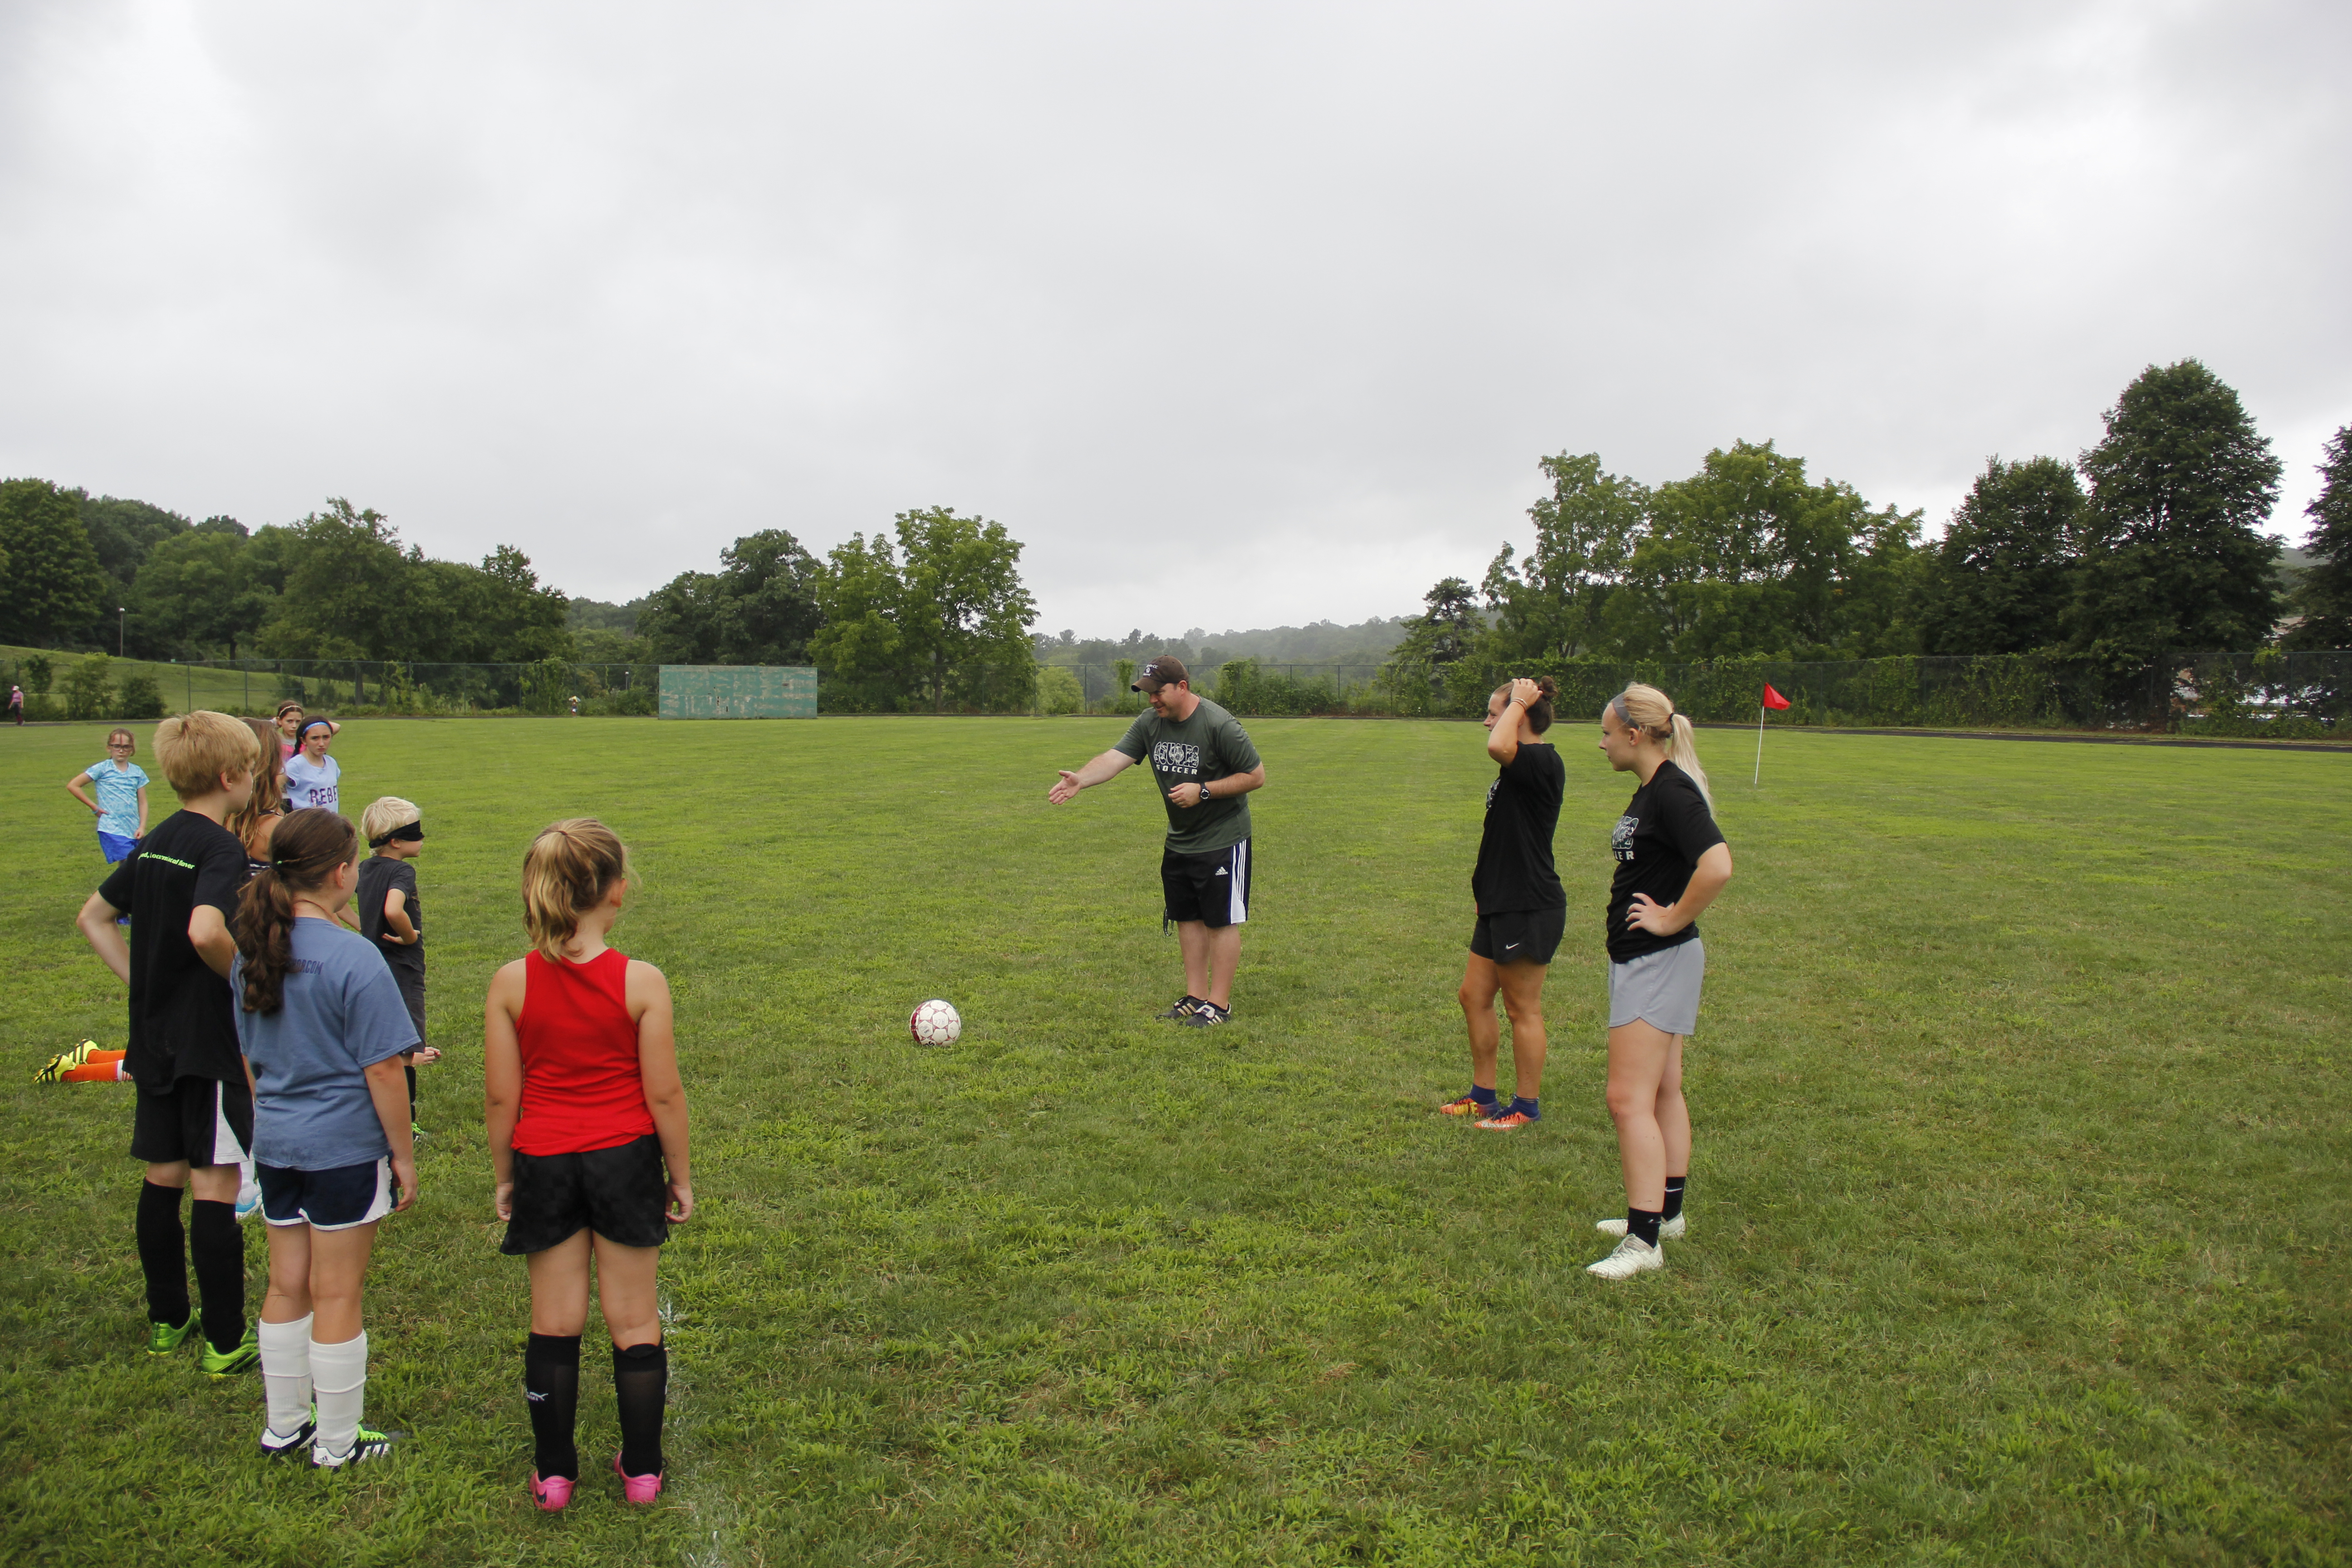 A soccer coach instructs students standing on a field